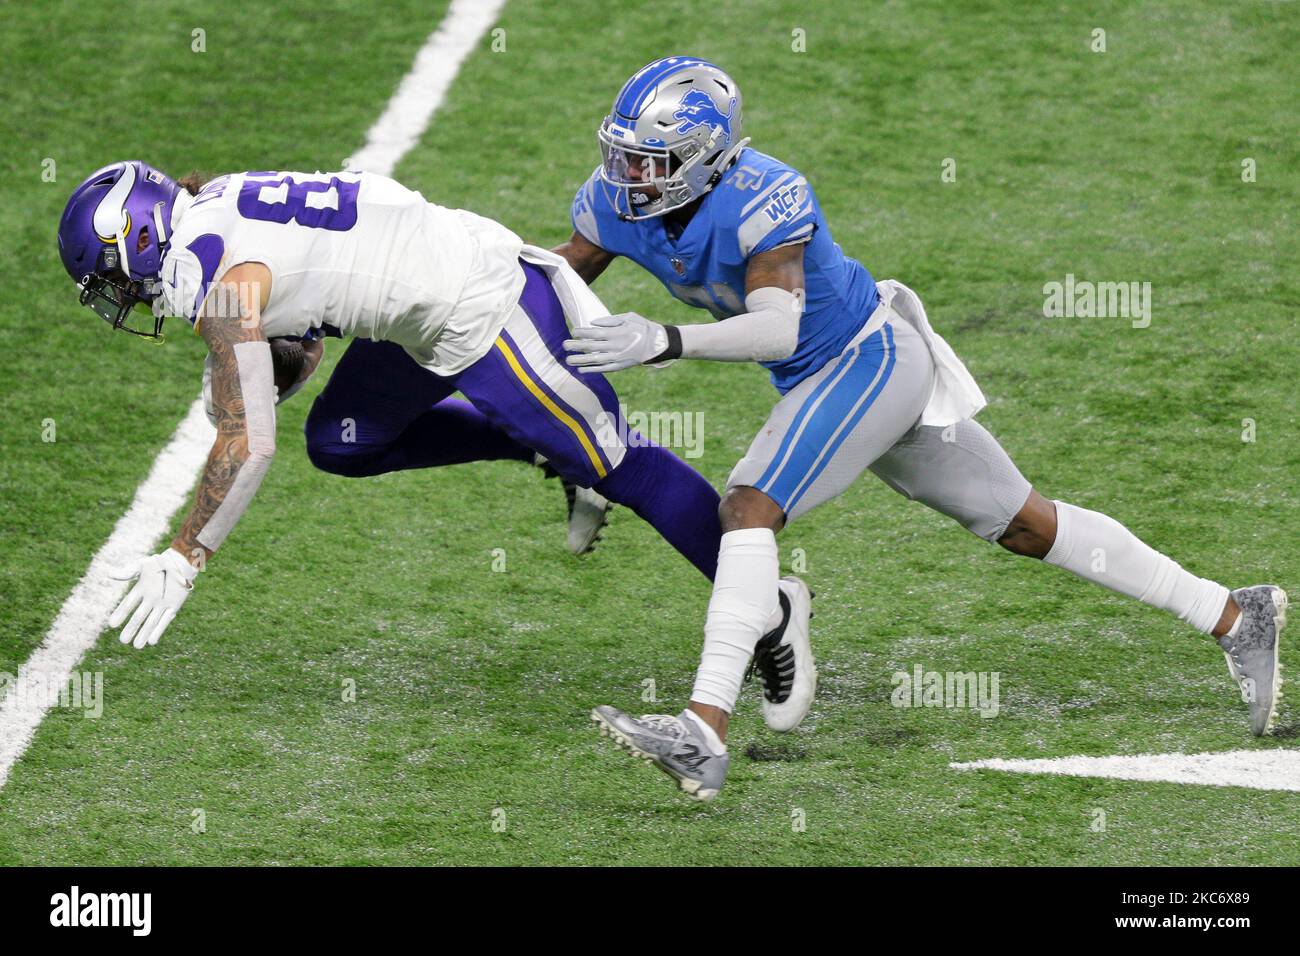 Minnesota Vikings tight end Tyler Conklin (83) is tackled by Detroit Lions defensive back Tracy Walker (21) during the first half of an NFL football game in Detroit, Michigan USA, on Sunday, January 3, 2021. (Photo by Jorge Lemus/NurPhoto) Stock Photo